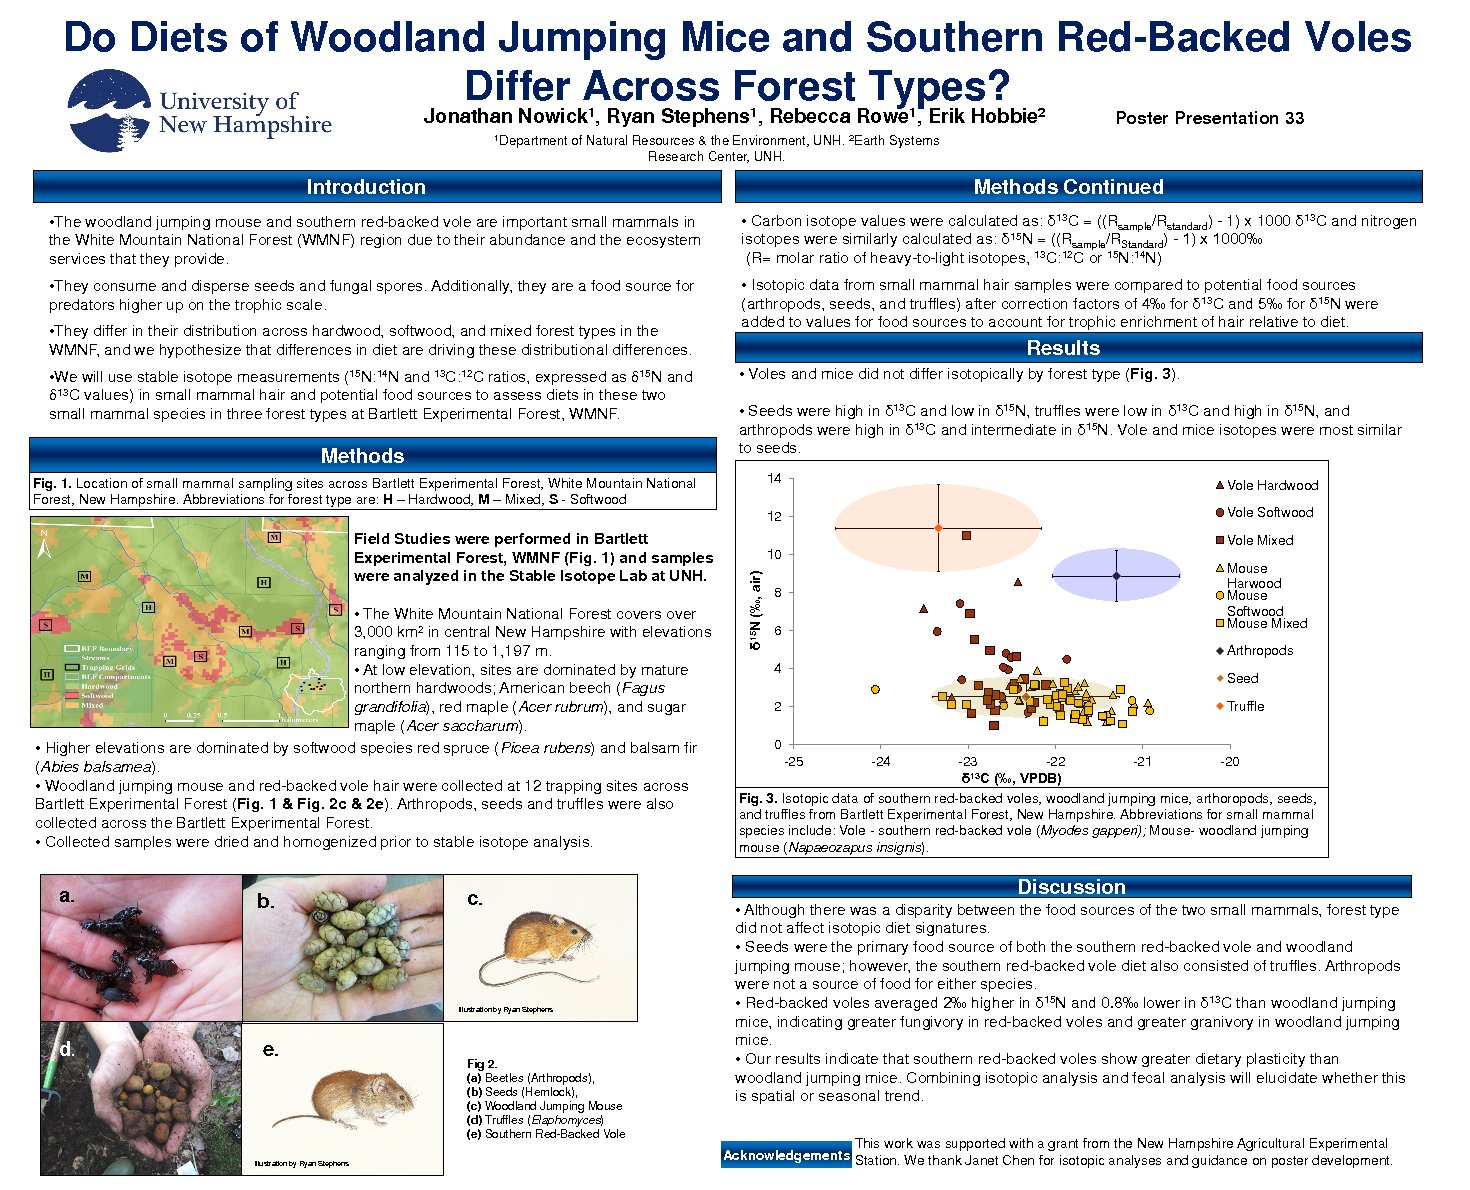 Do Diets Of Woodland Jumping Mice And Southern Red-Backed Voles Differ Across Forest Types? by jpd62